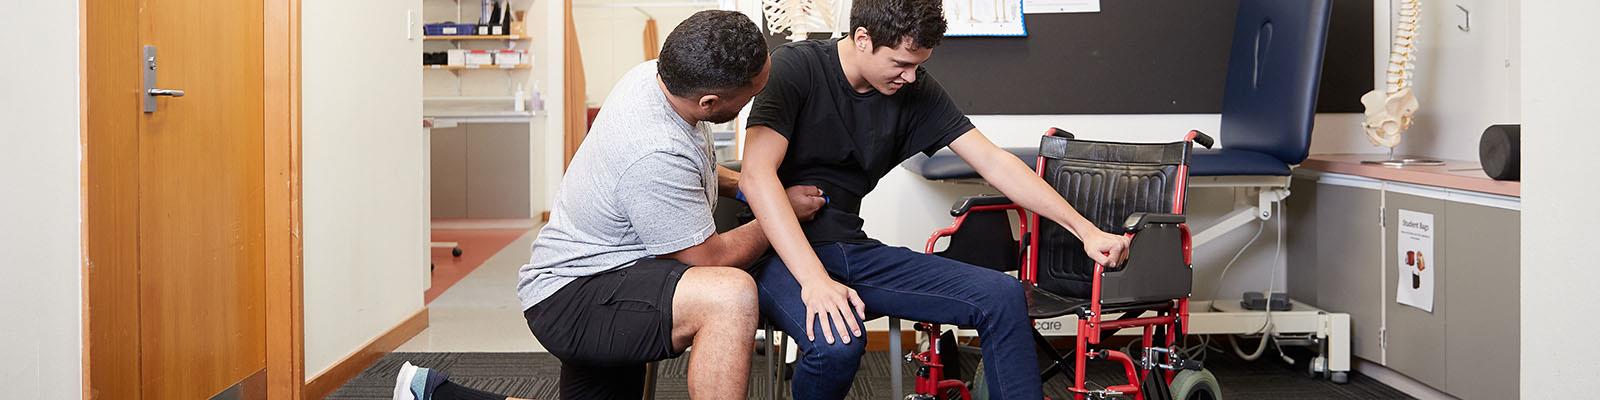 Physiotherapist working with client with mobility issues